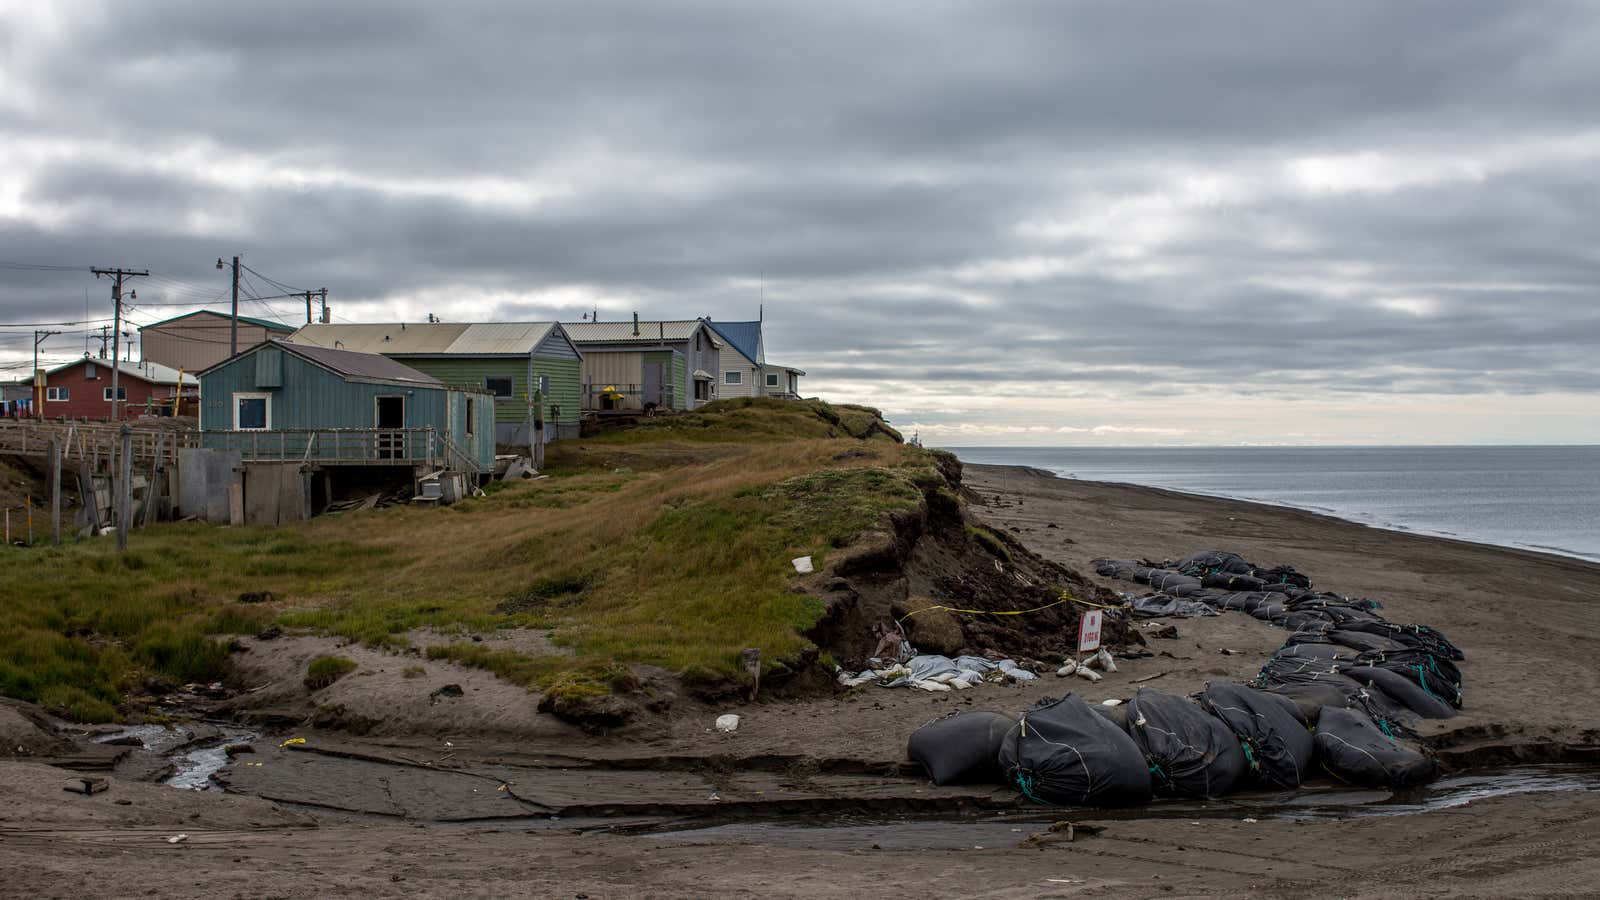 An eroding bluff that contains Inupiaq archaeological artifacts in Utqiaġvik, Alaska. The land here has receded many meters over the past few decades. Photo: Ash Adams/Gizmodo